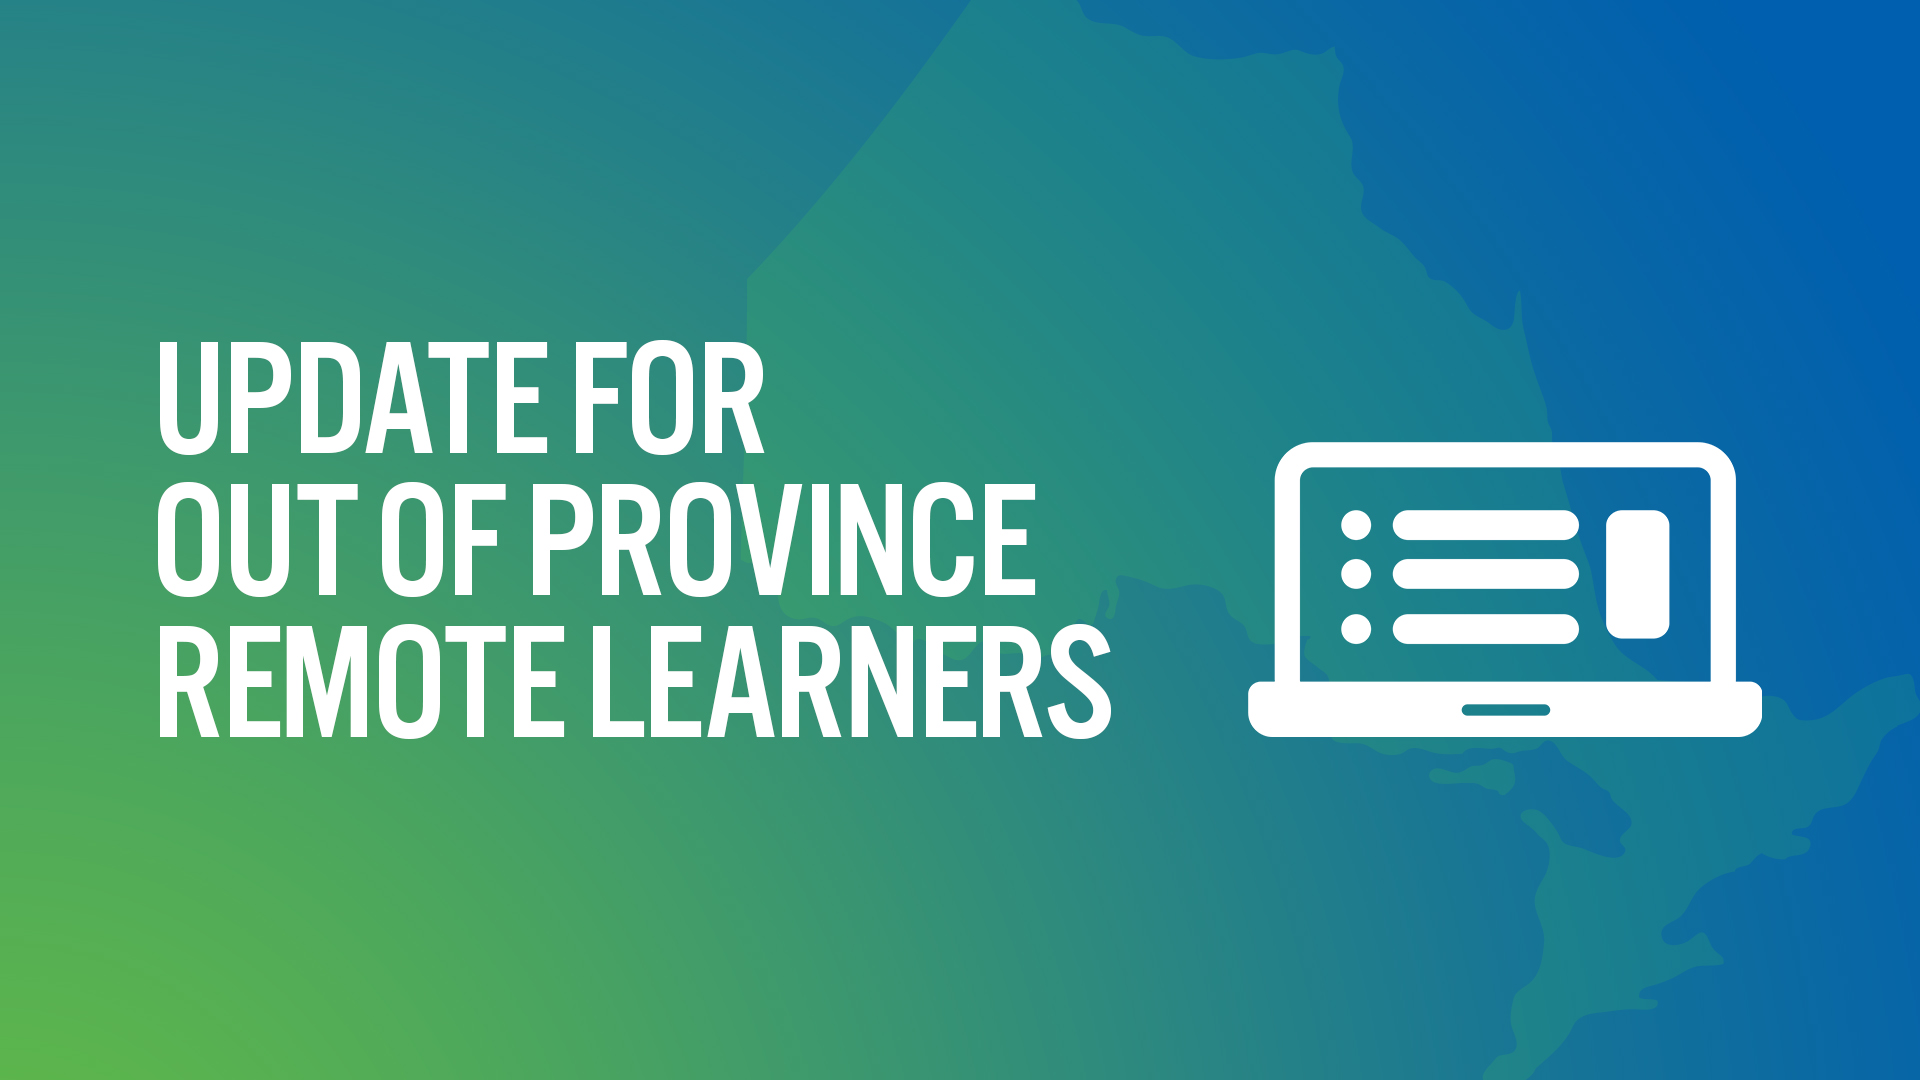 Update for Out of Province Remote Learners